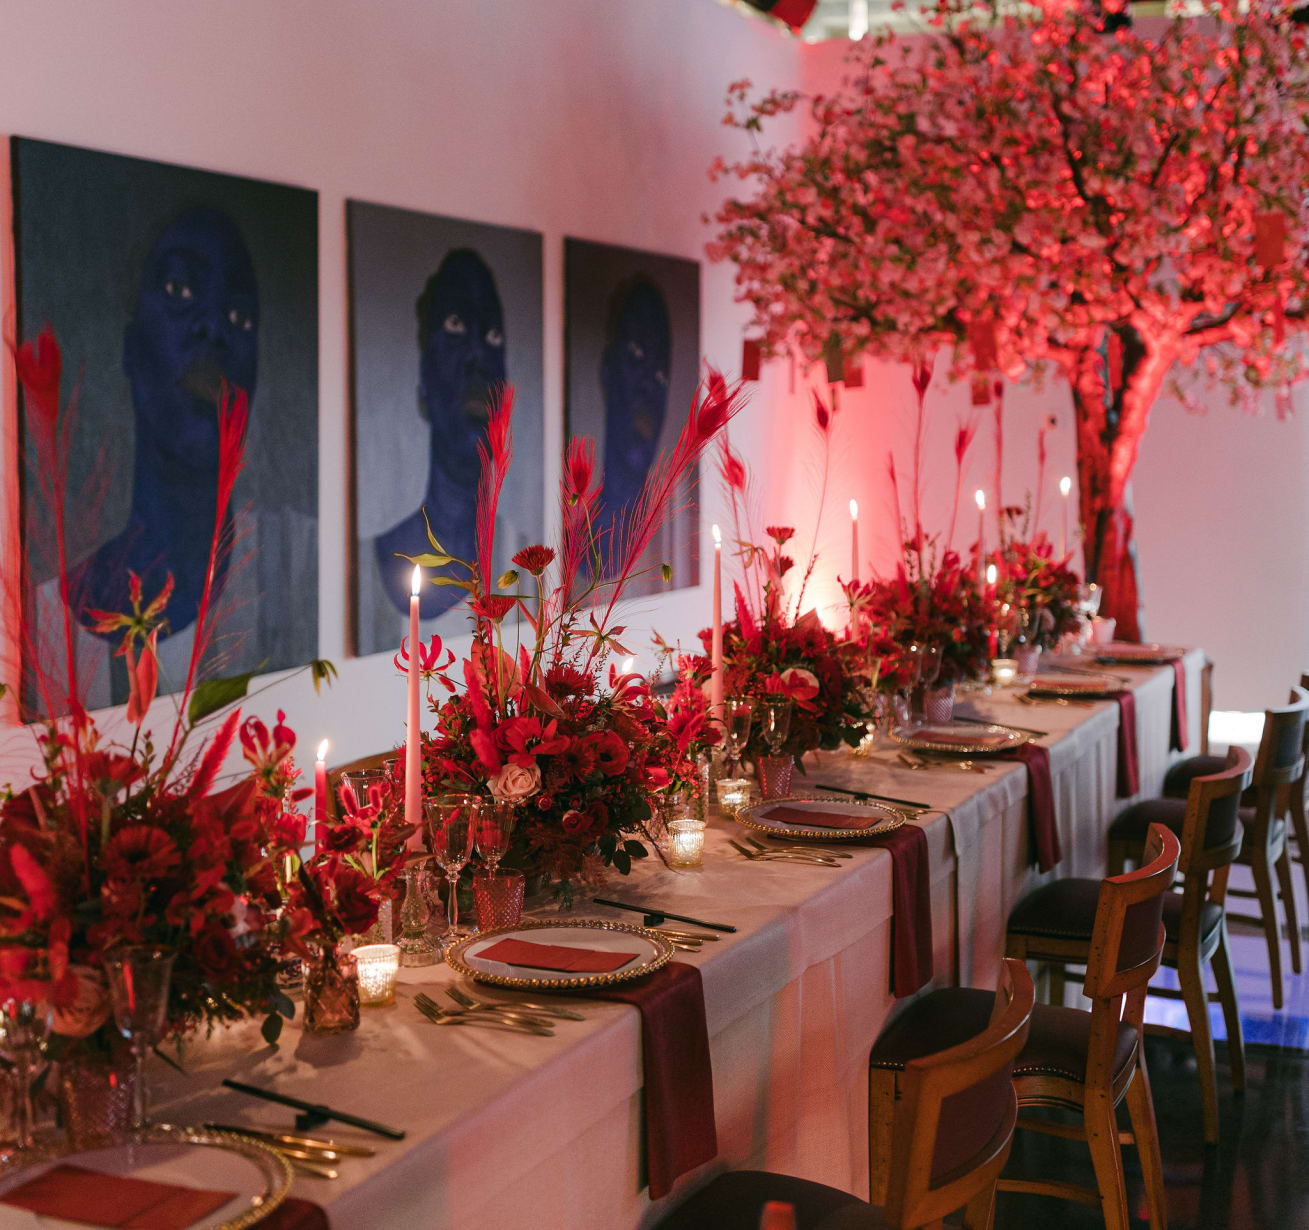 3 Hanover Square, Mayfair: Private Chinese New Year Dinner catered by Jimmy Garcia Catering.